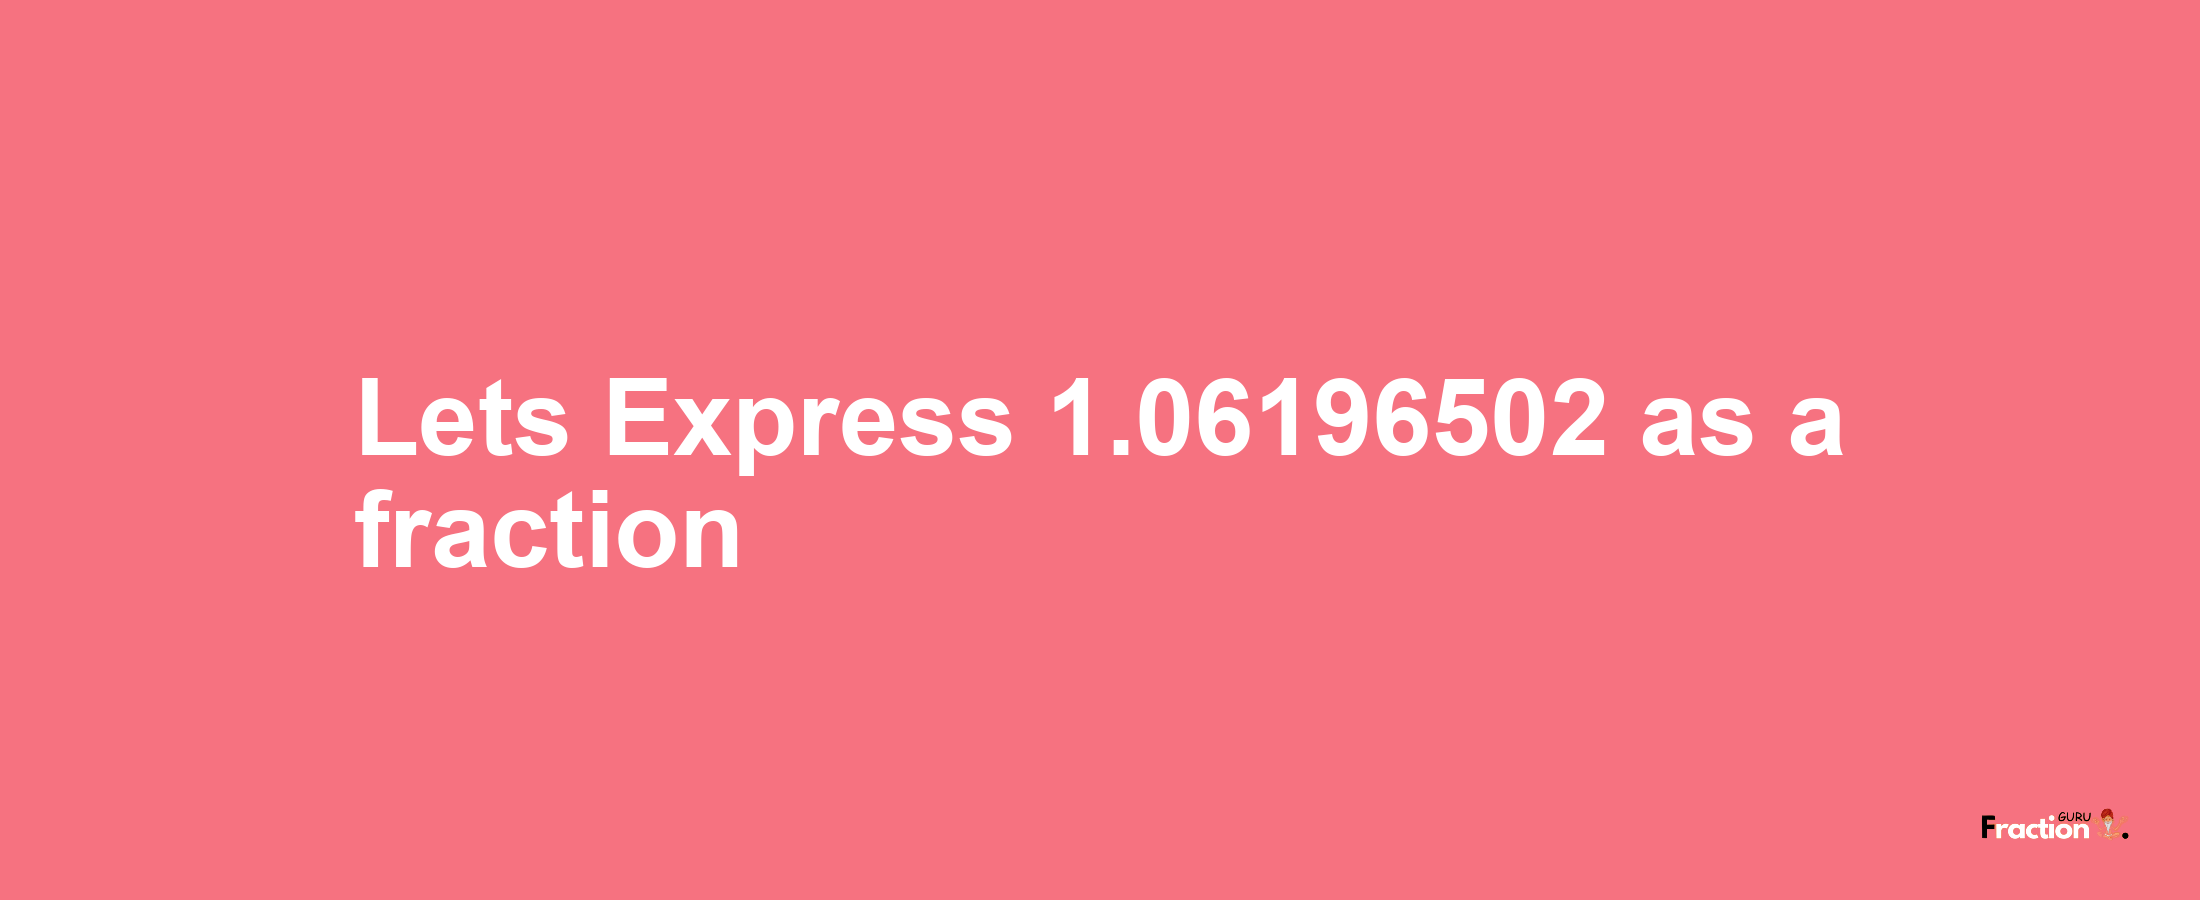 Lets Express 1.06196502 as afraction